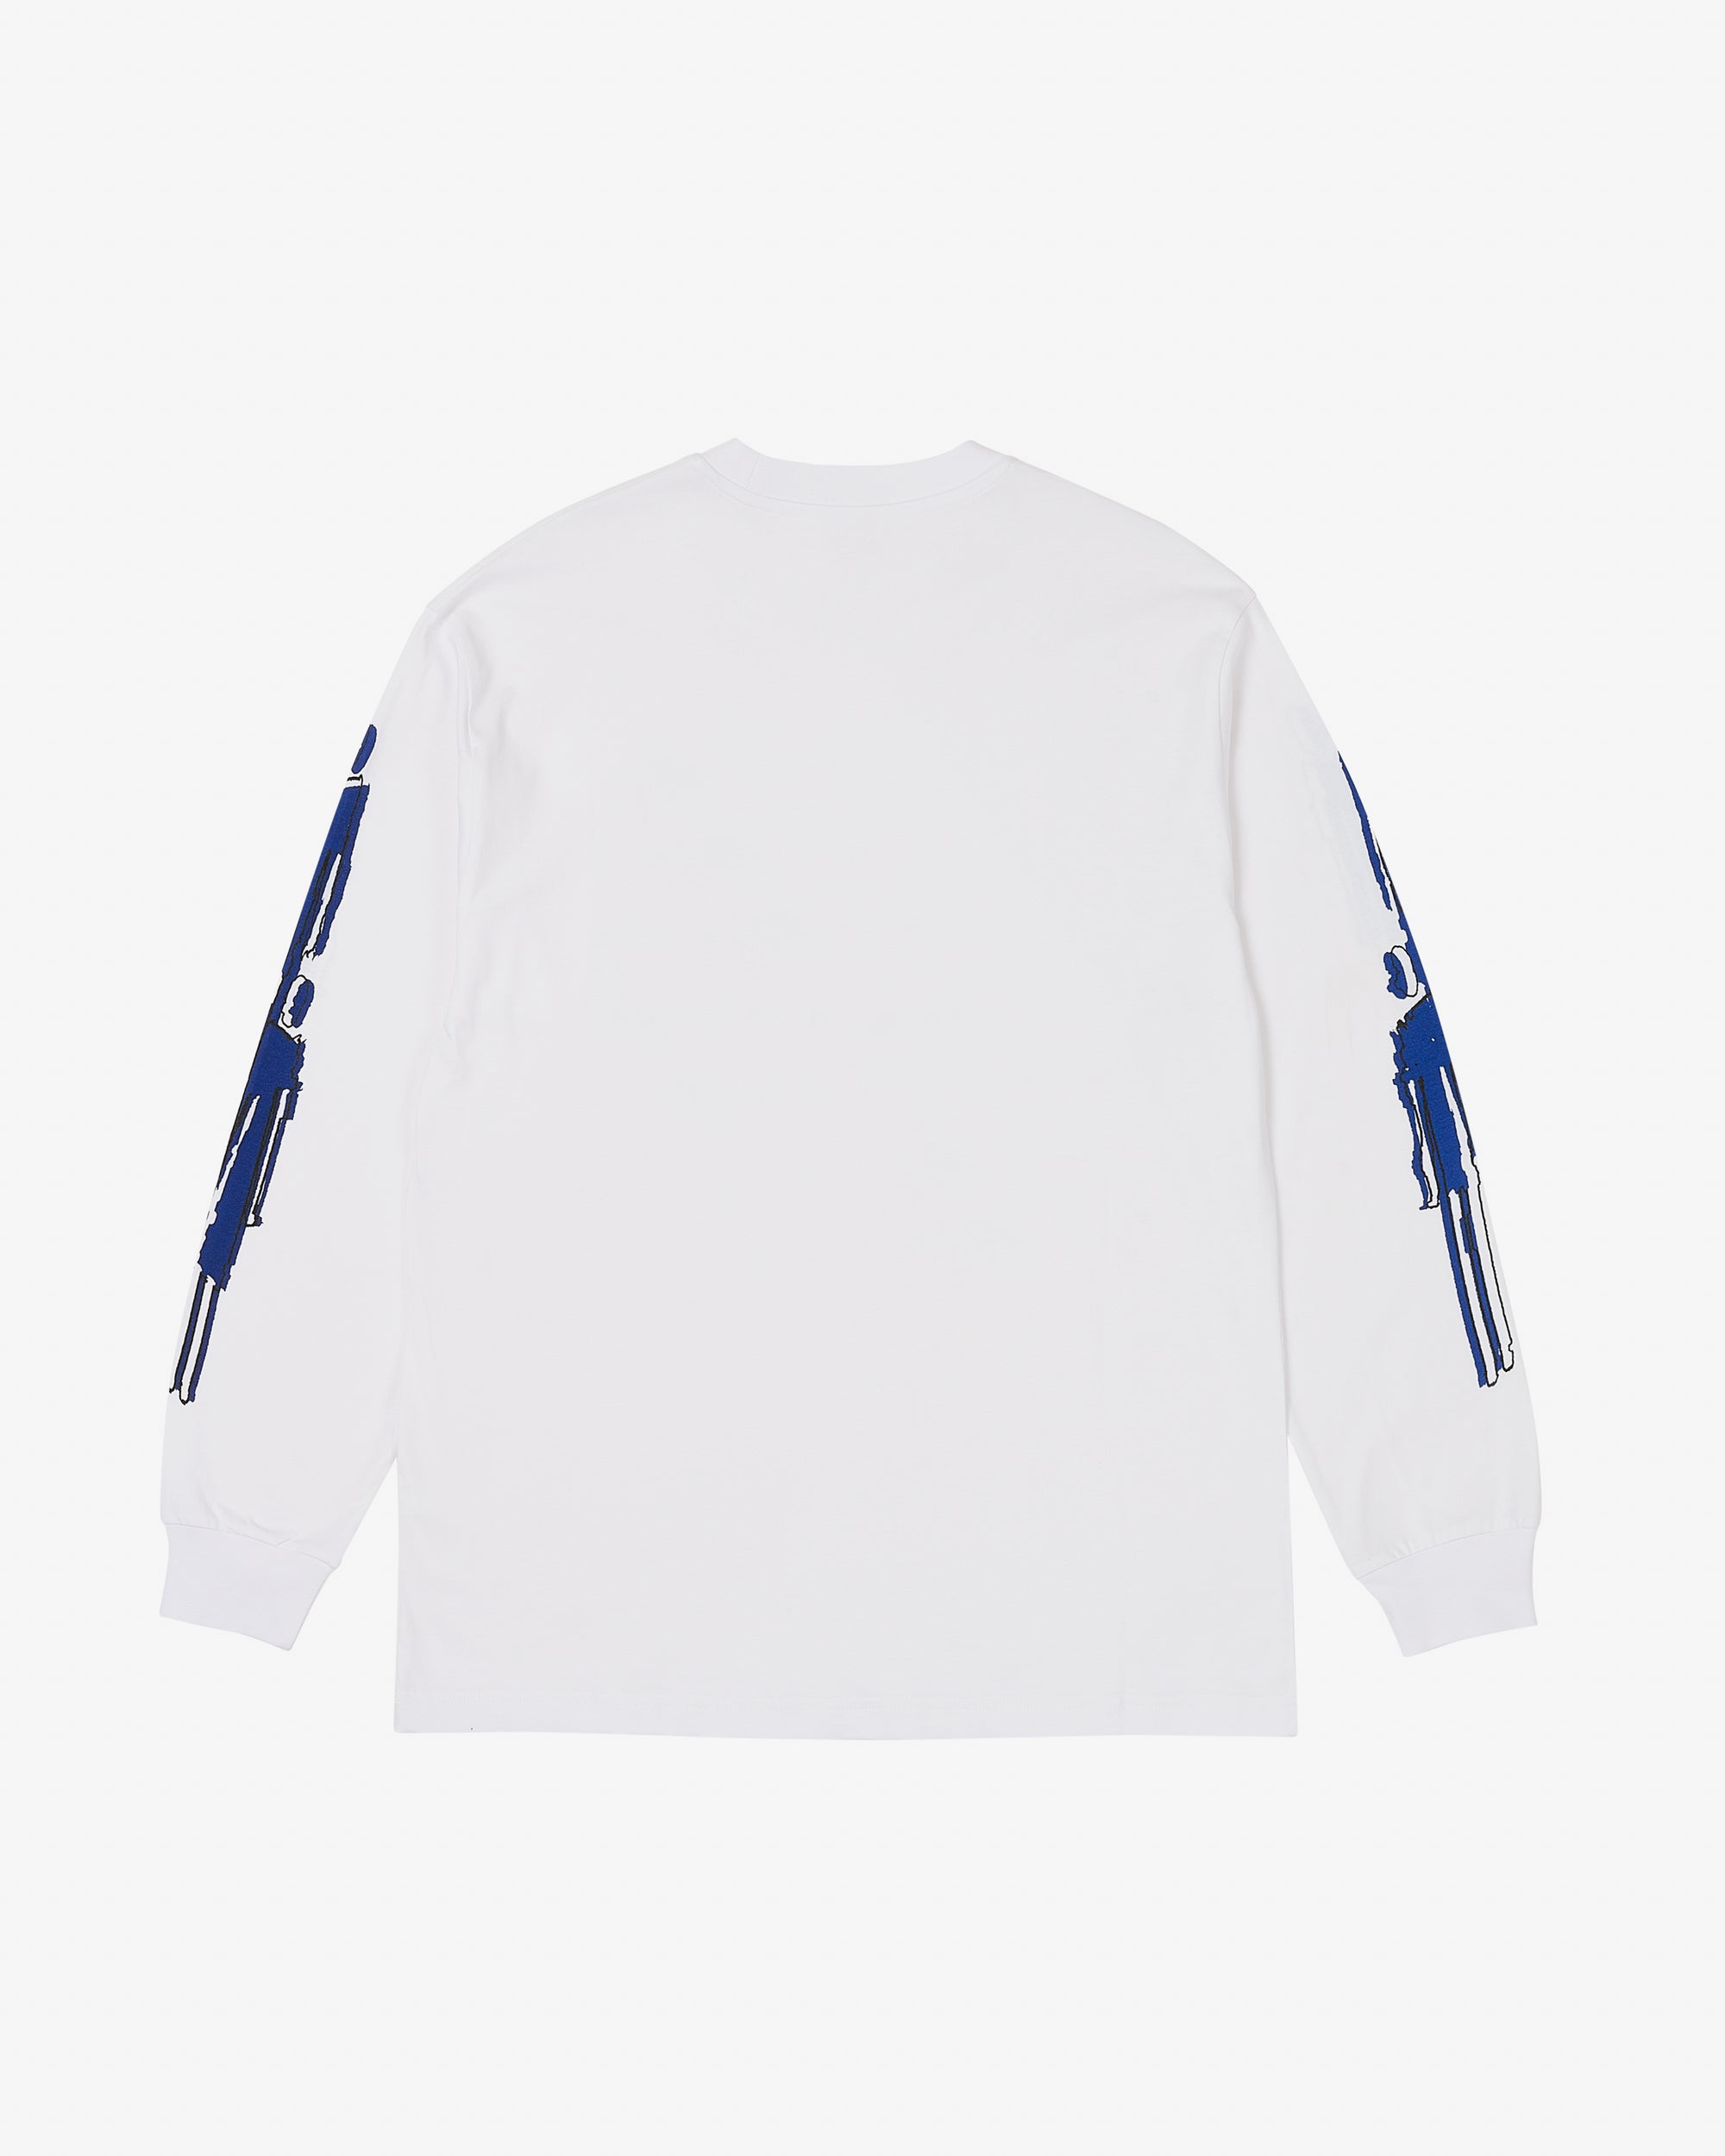 Palace - Men's Repeater Longsleeve - (White) view 2